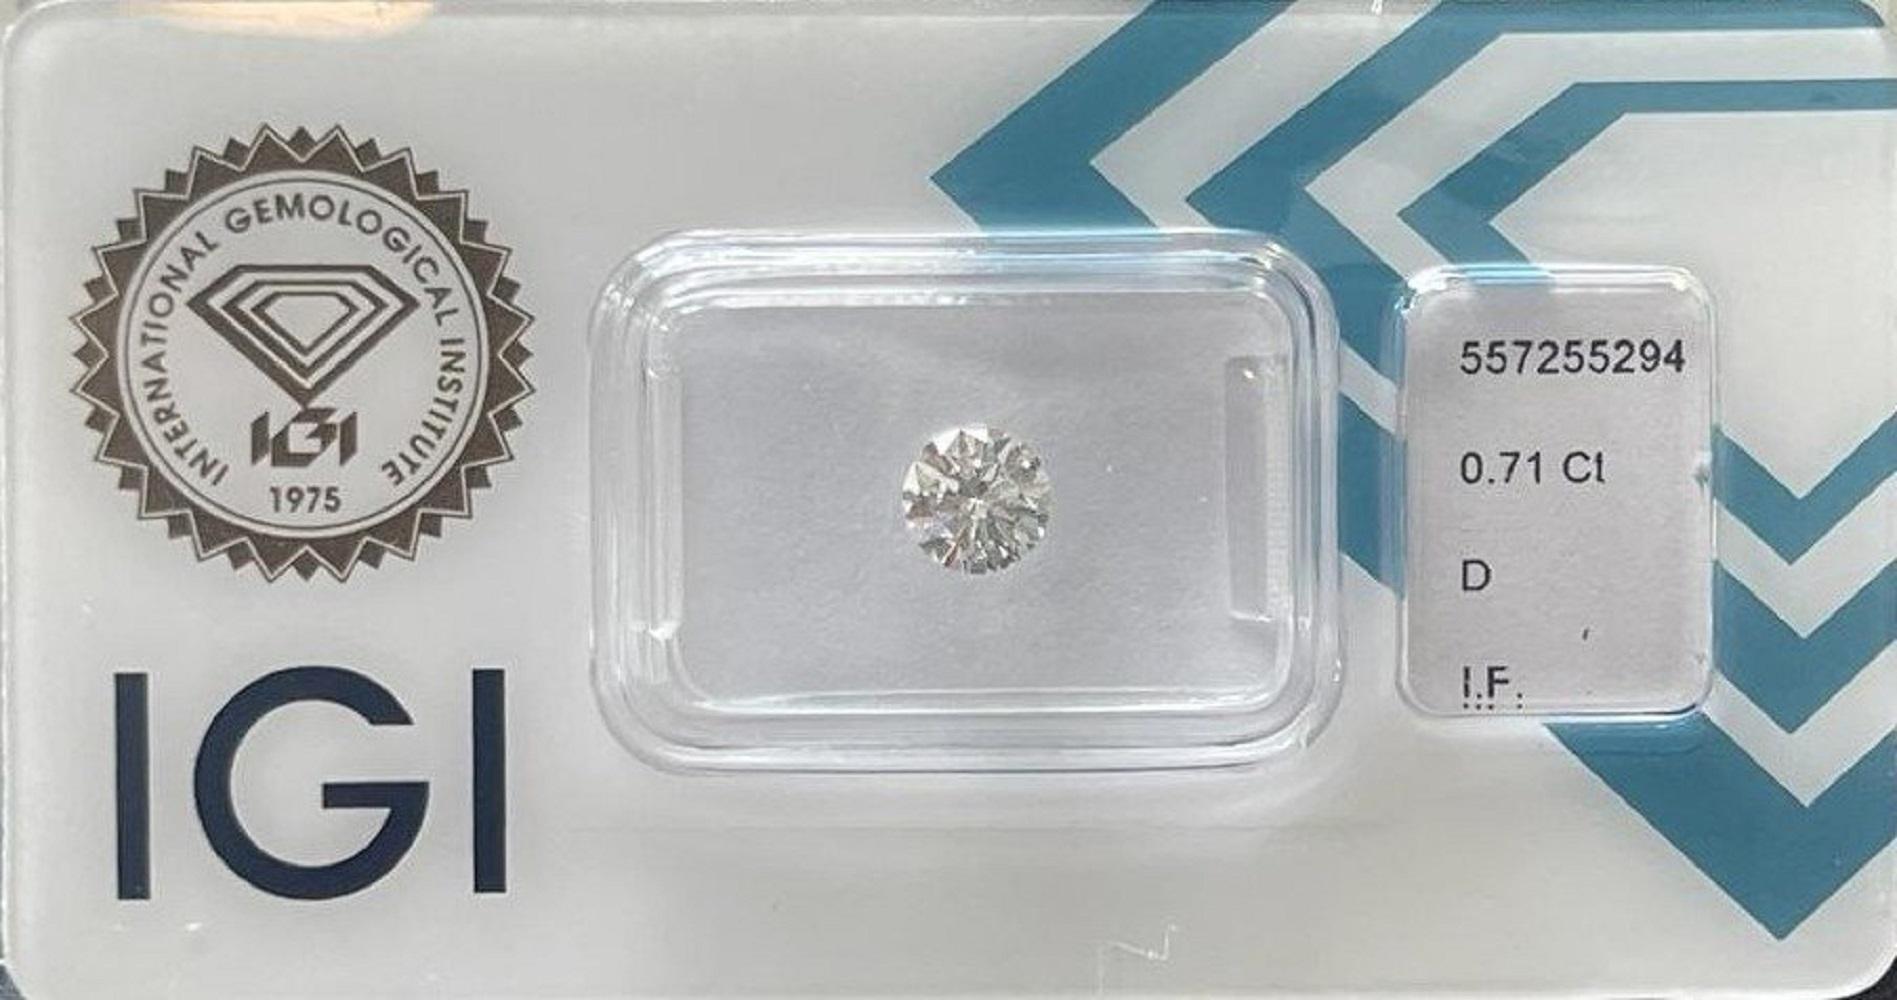 Women's or Men's Dazzling 1pc Flawless Natural Diamond with 0.71 ct Round D IF IGI Certificate